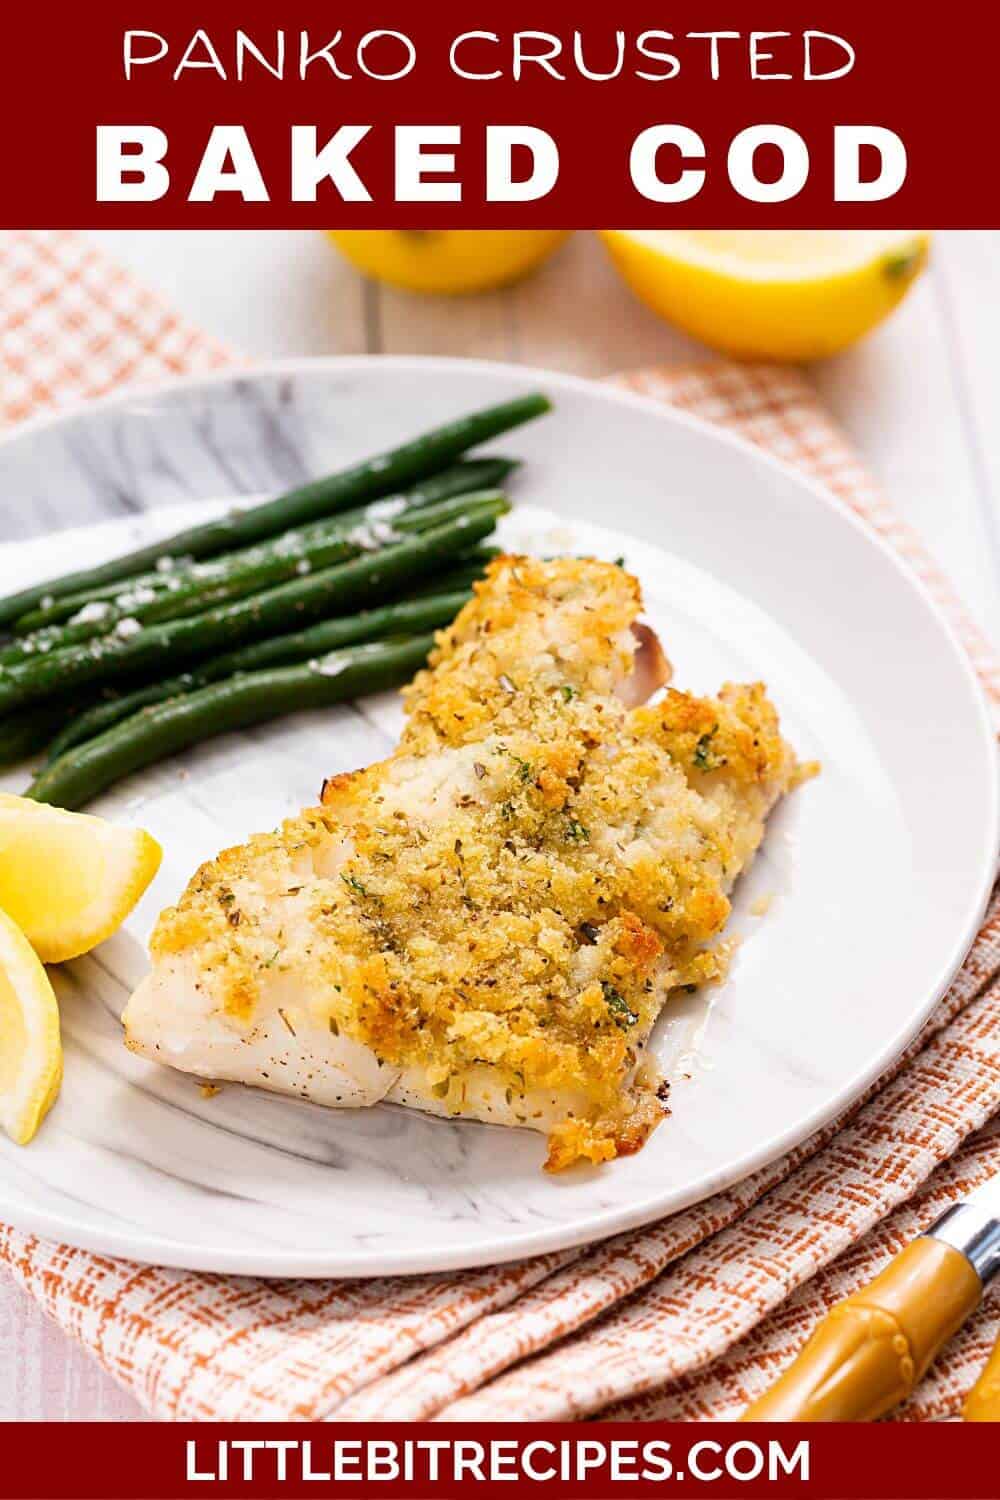 panko crusted baked cod with text.